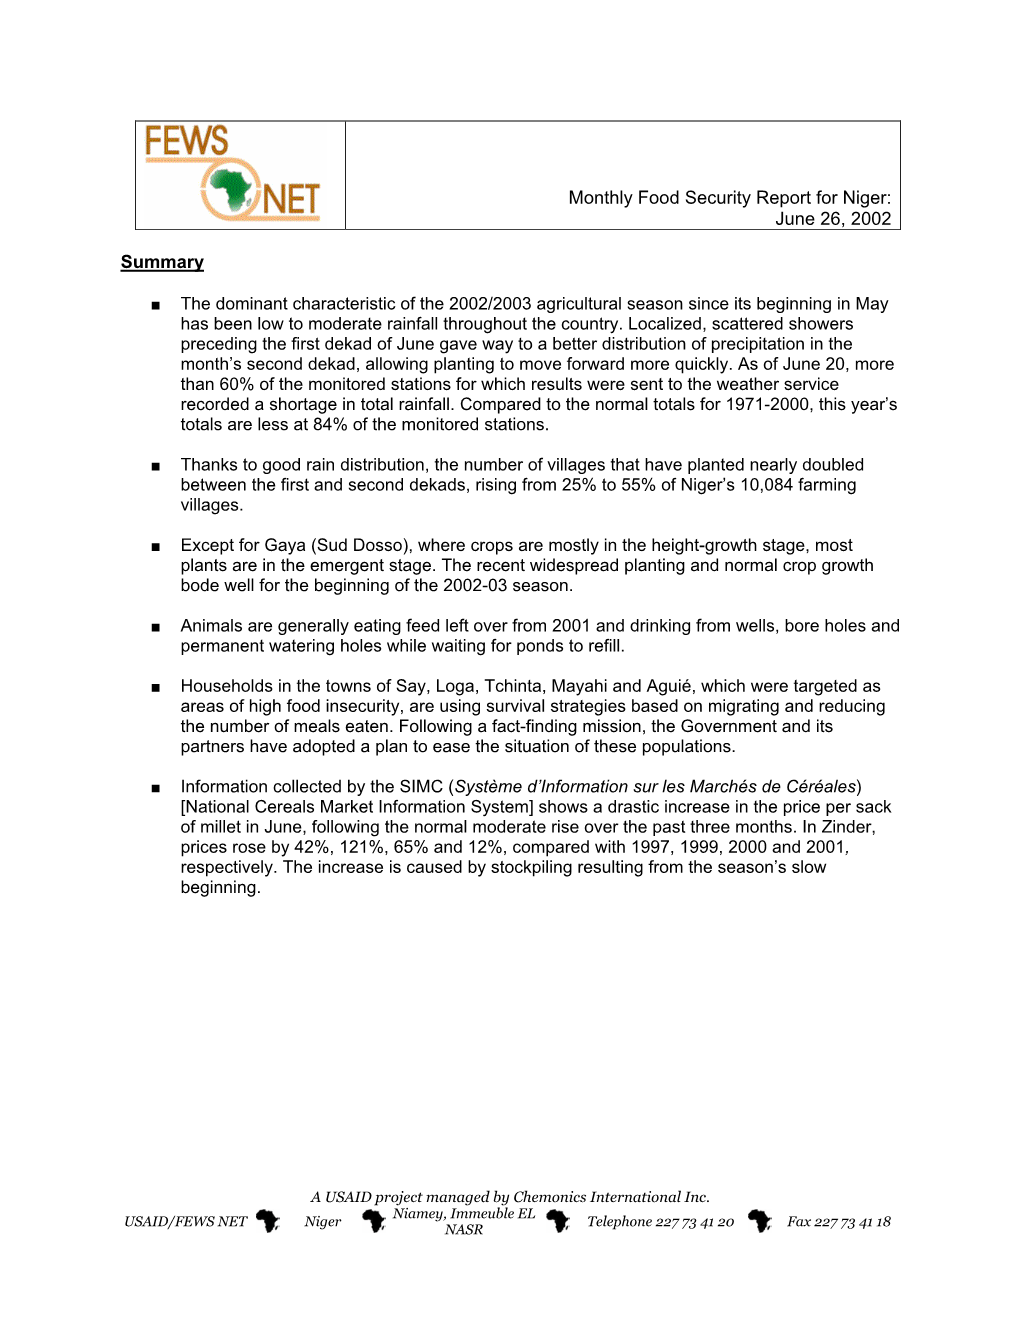 Monthly Food Security Report for Niger: June 26, 2002 Summary